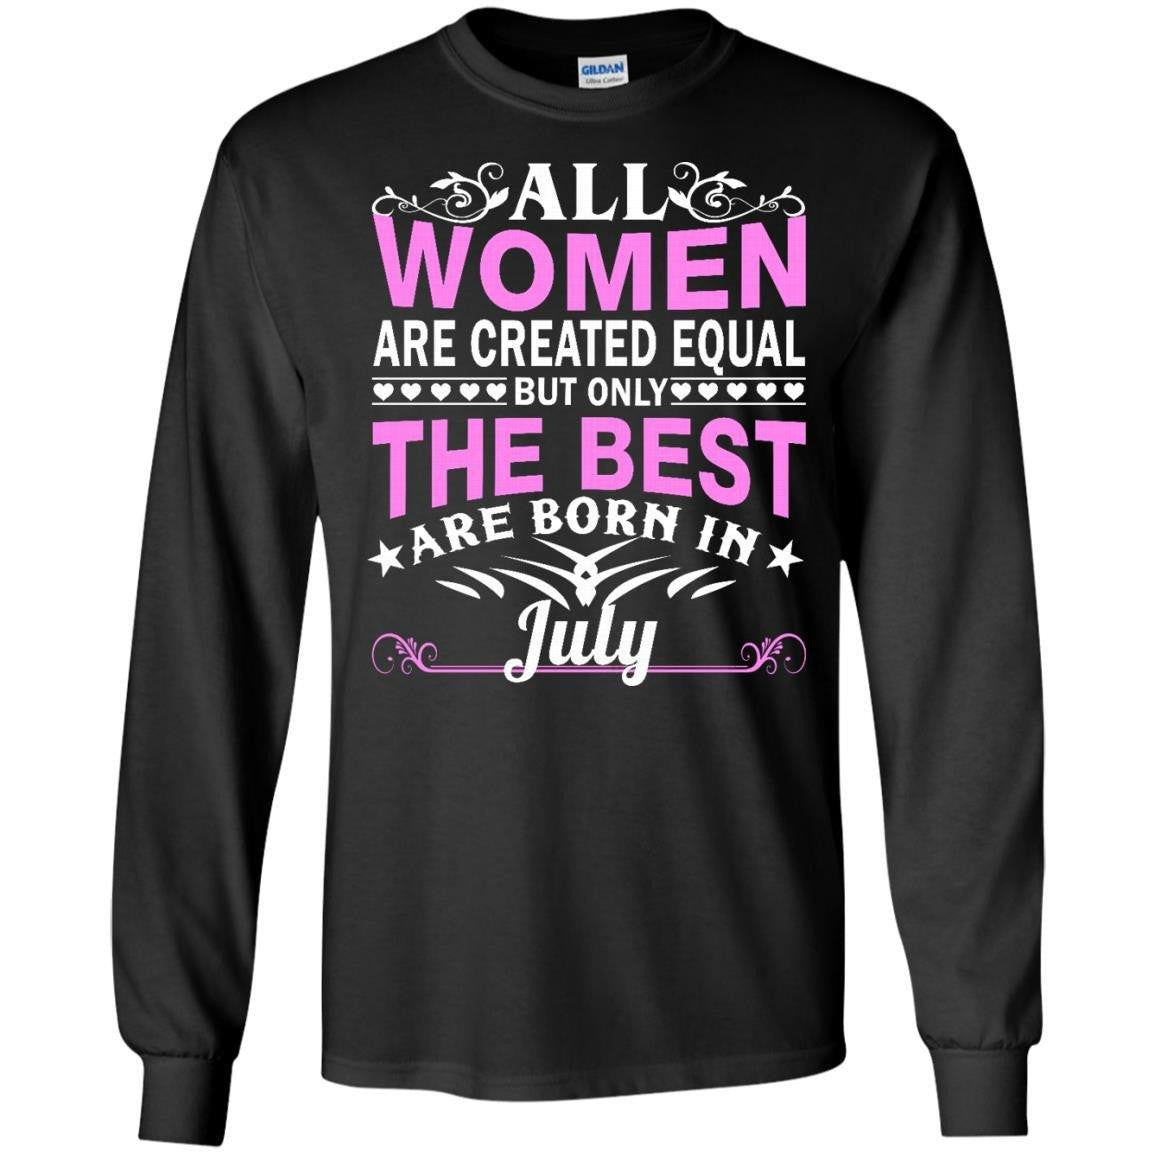 All Women Are Created Equal But Only The Best Are Born In July shirt,